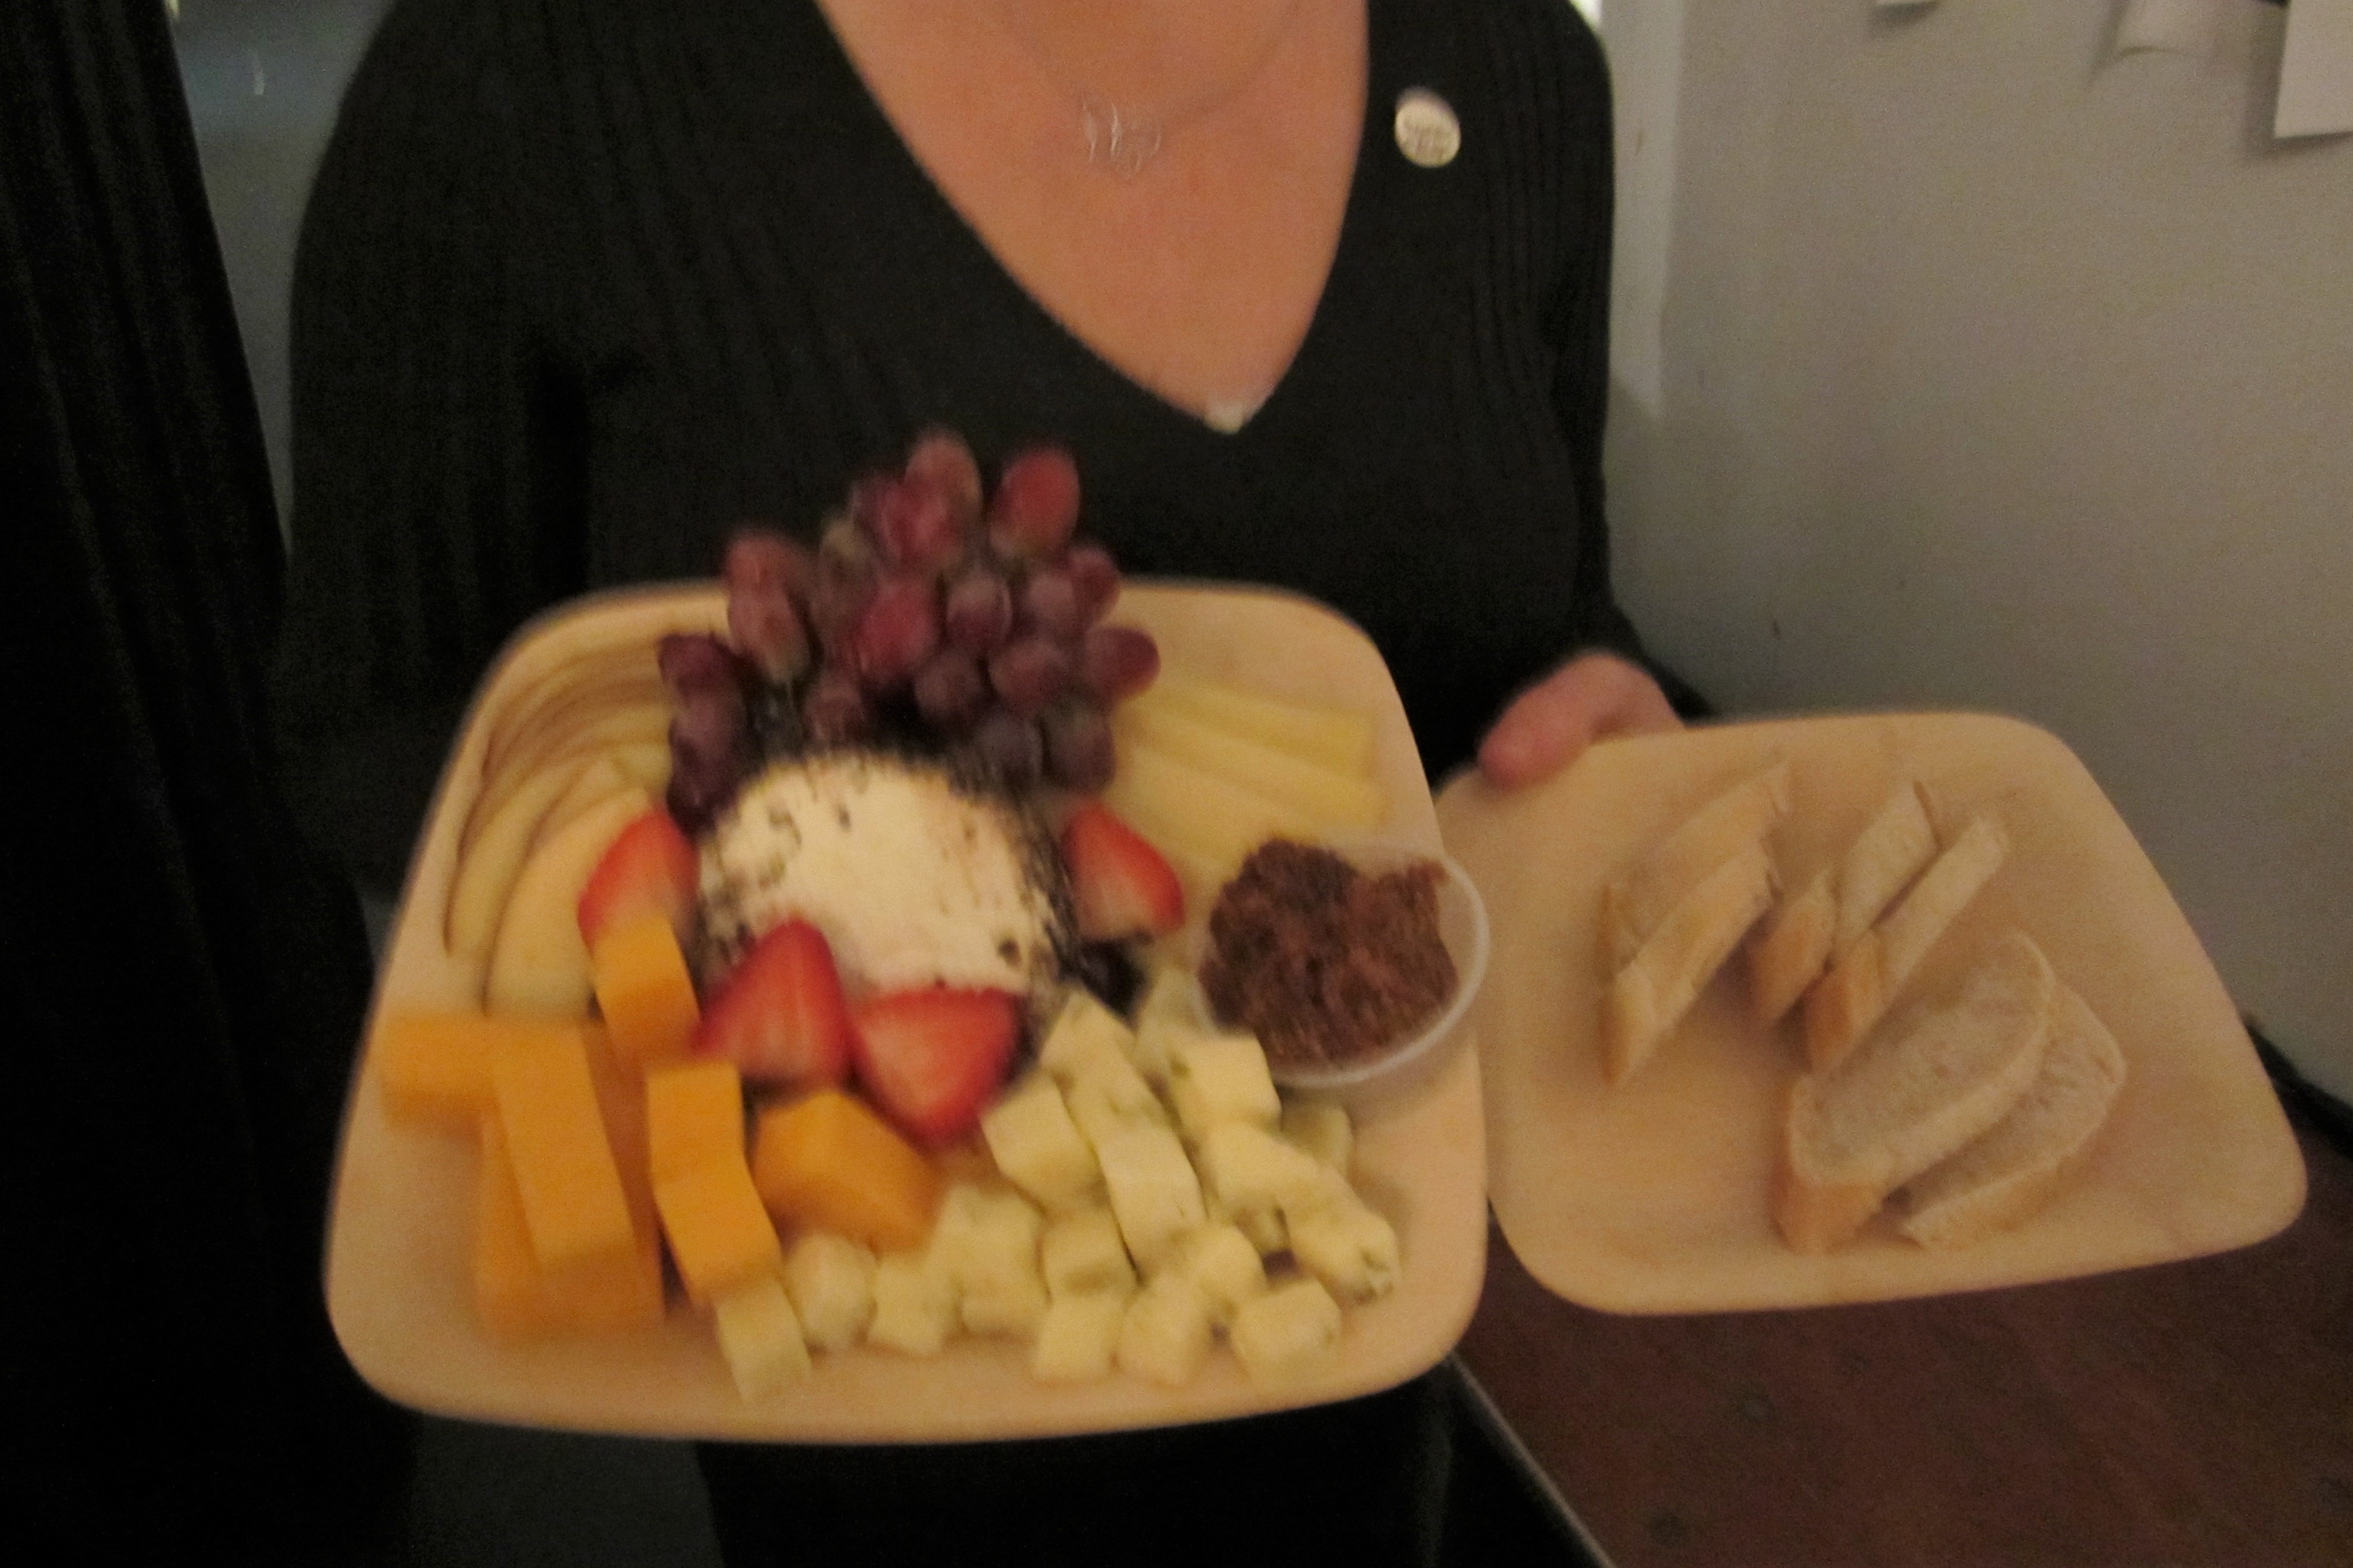 Design Miami cafe catered menu | cheese platter